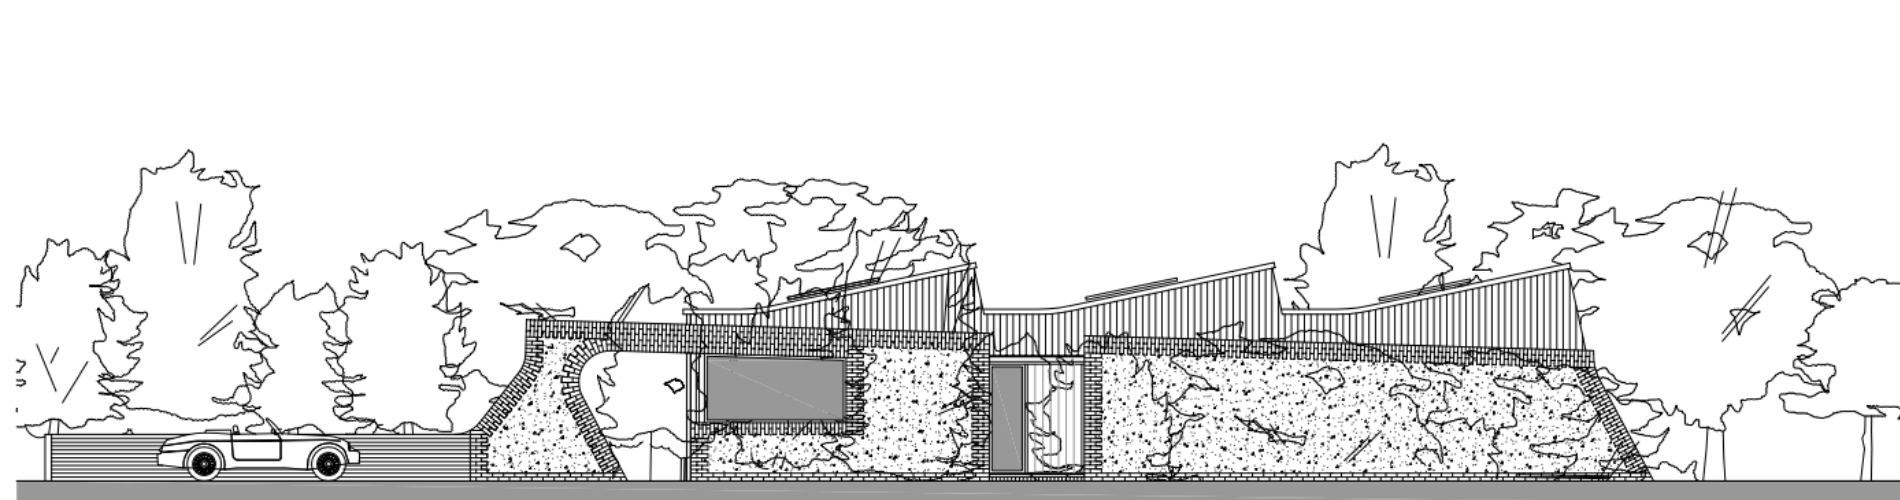 project zero emissions home sketch